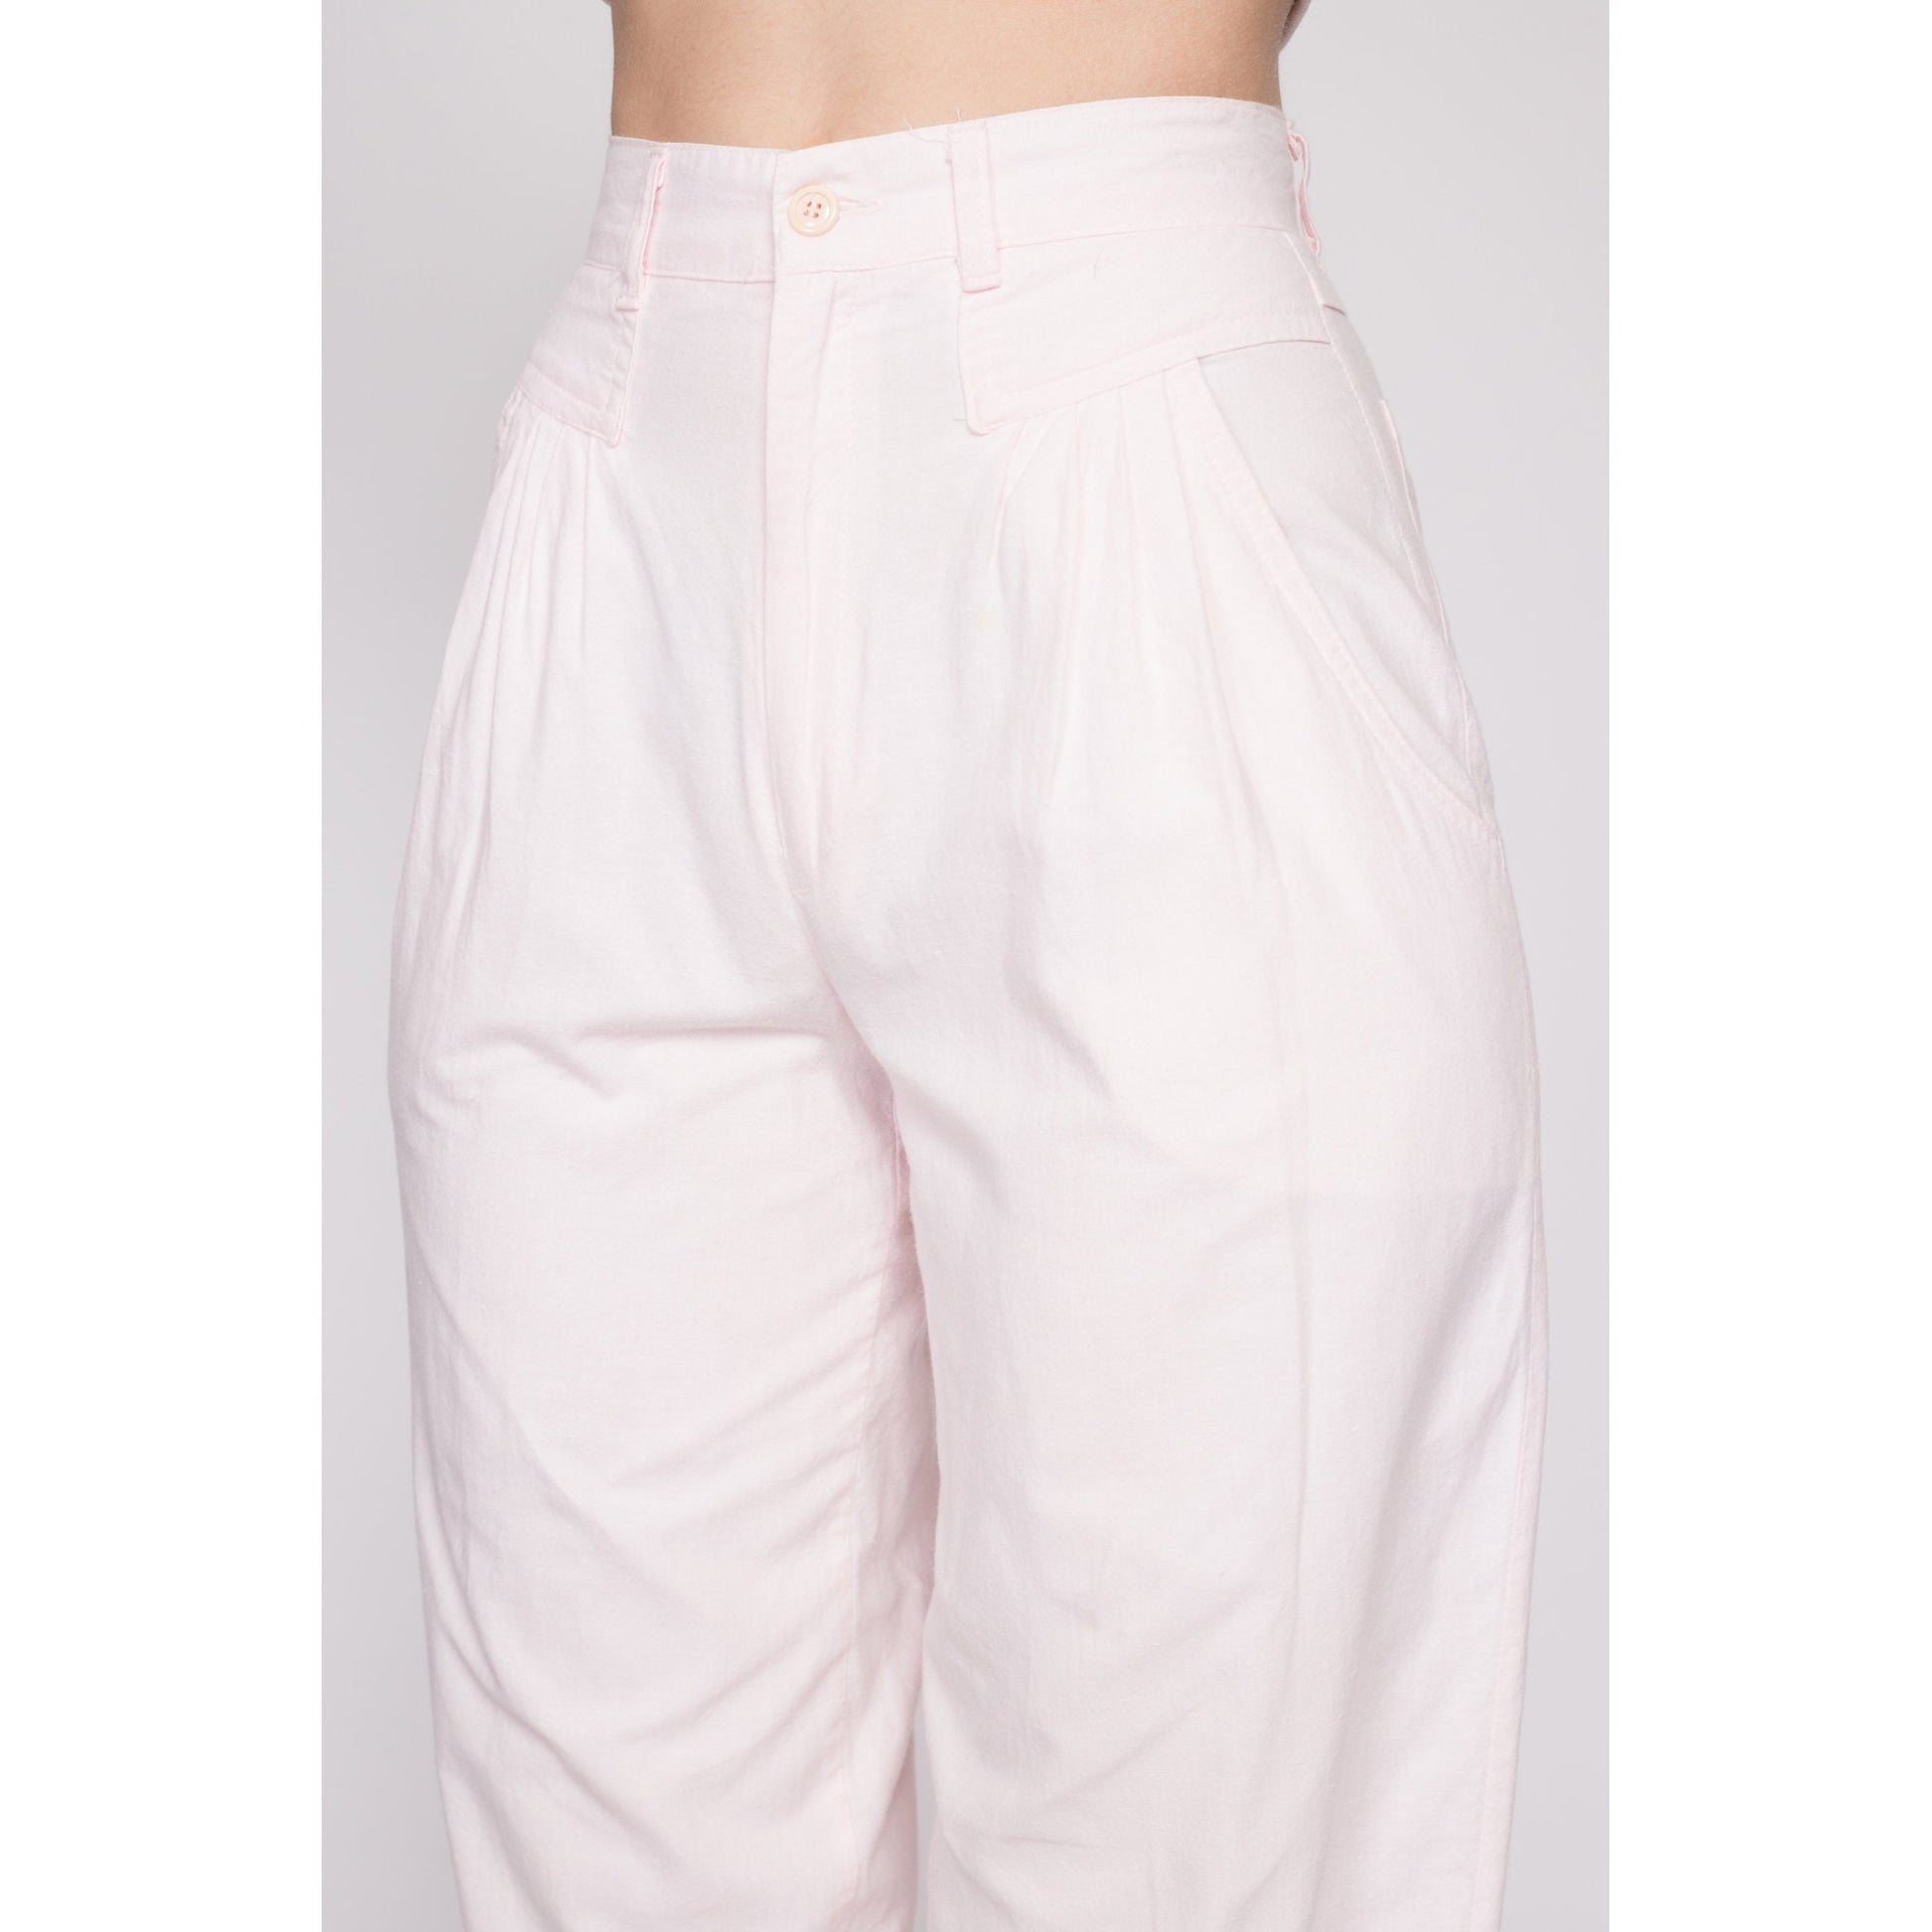 XS 80s Pastel Pink High Waisted Pants 23 – Flying Apple Vintage